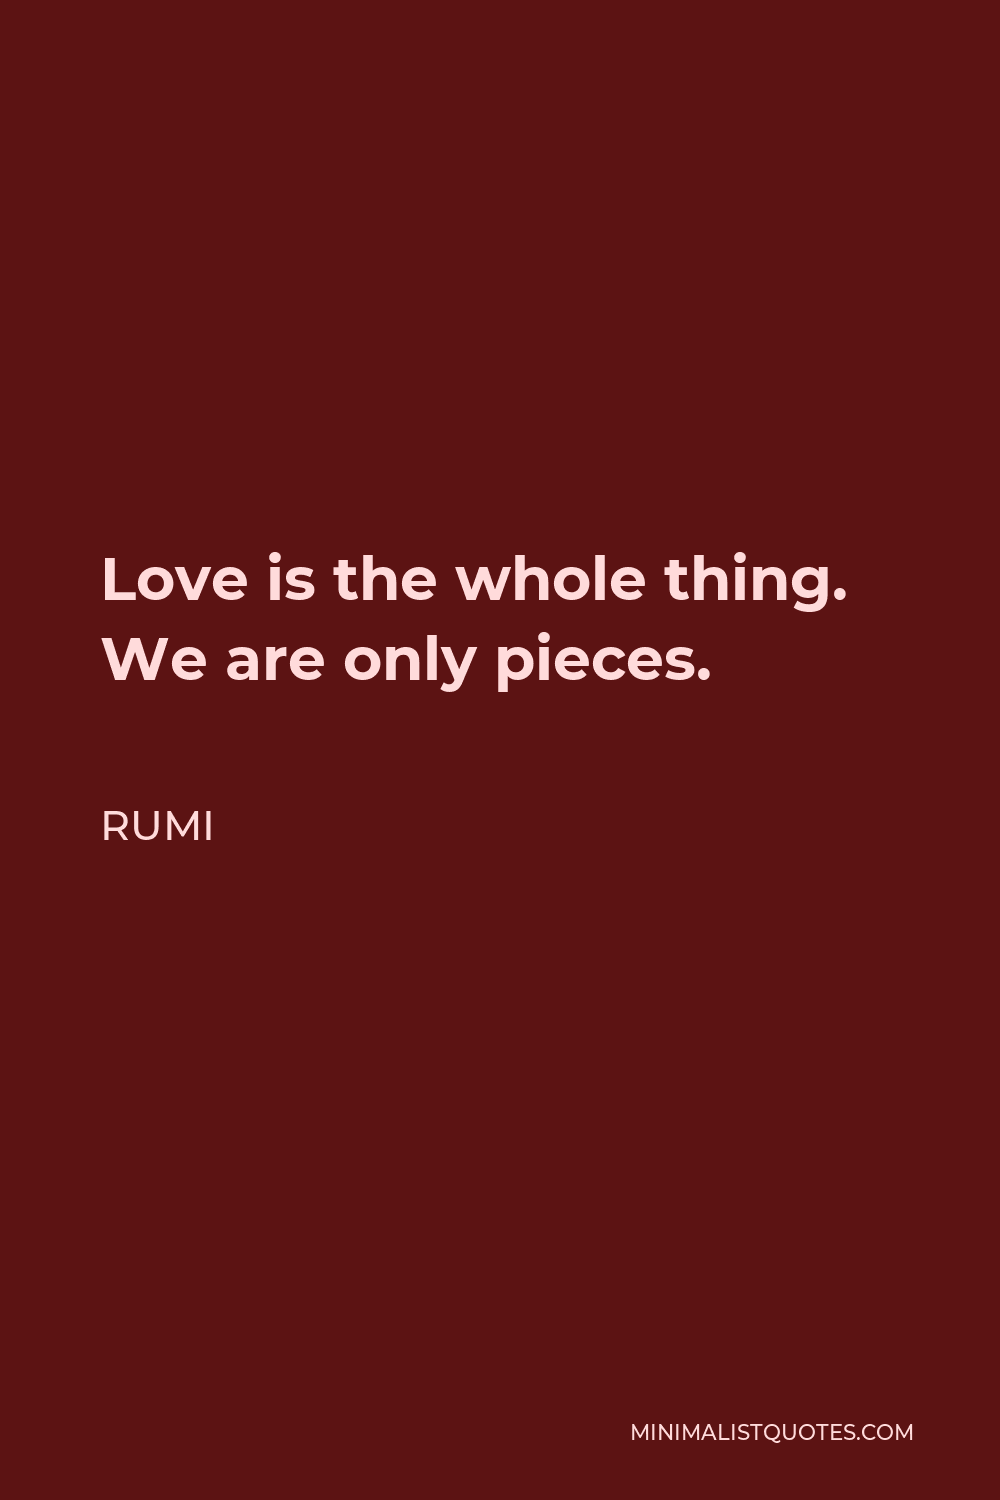 Rumi Quote - Love is the whole thing. We are only pieces.